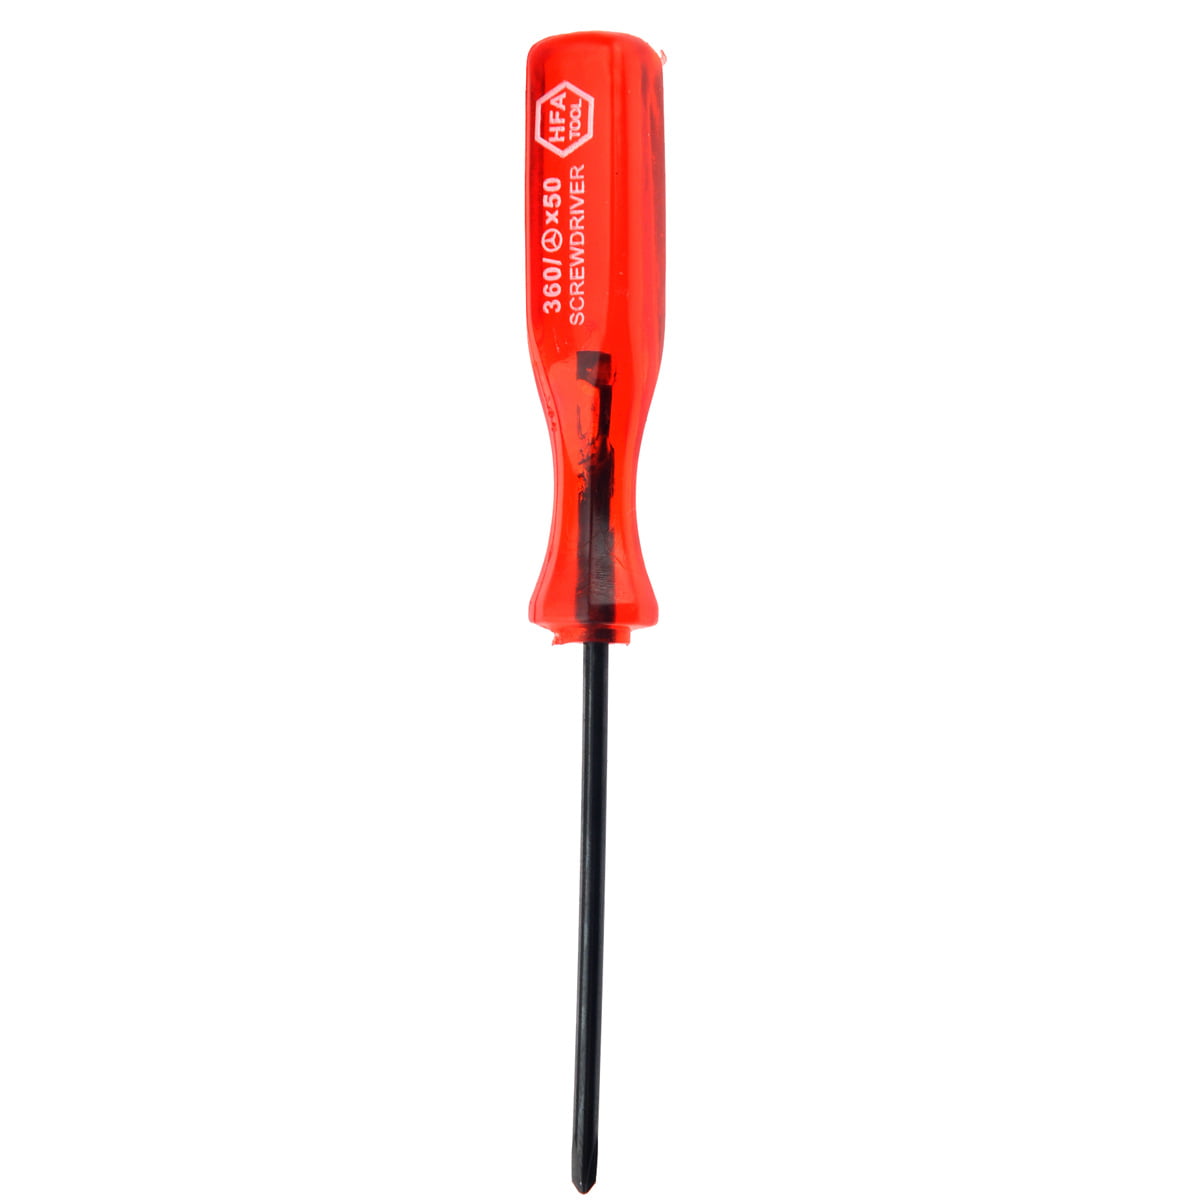 GCAMX Wii & Ds Lite Tri-wing Triwing Y-Tip Screwdriver Tool